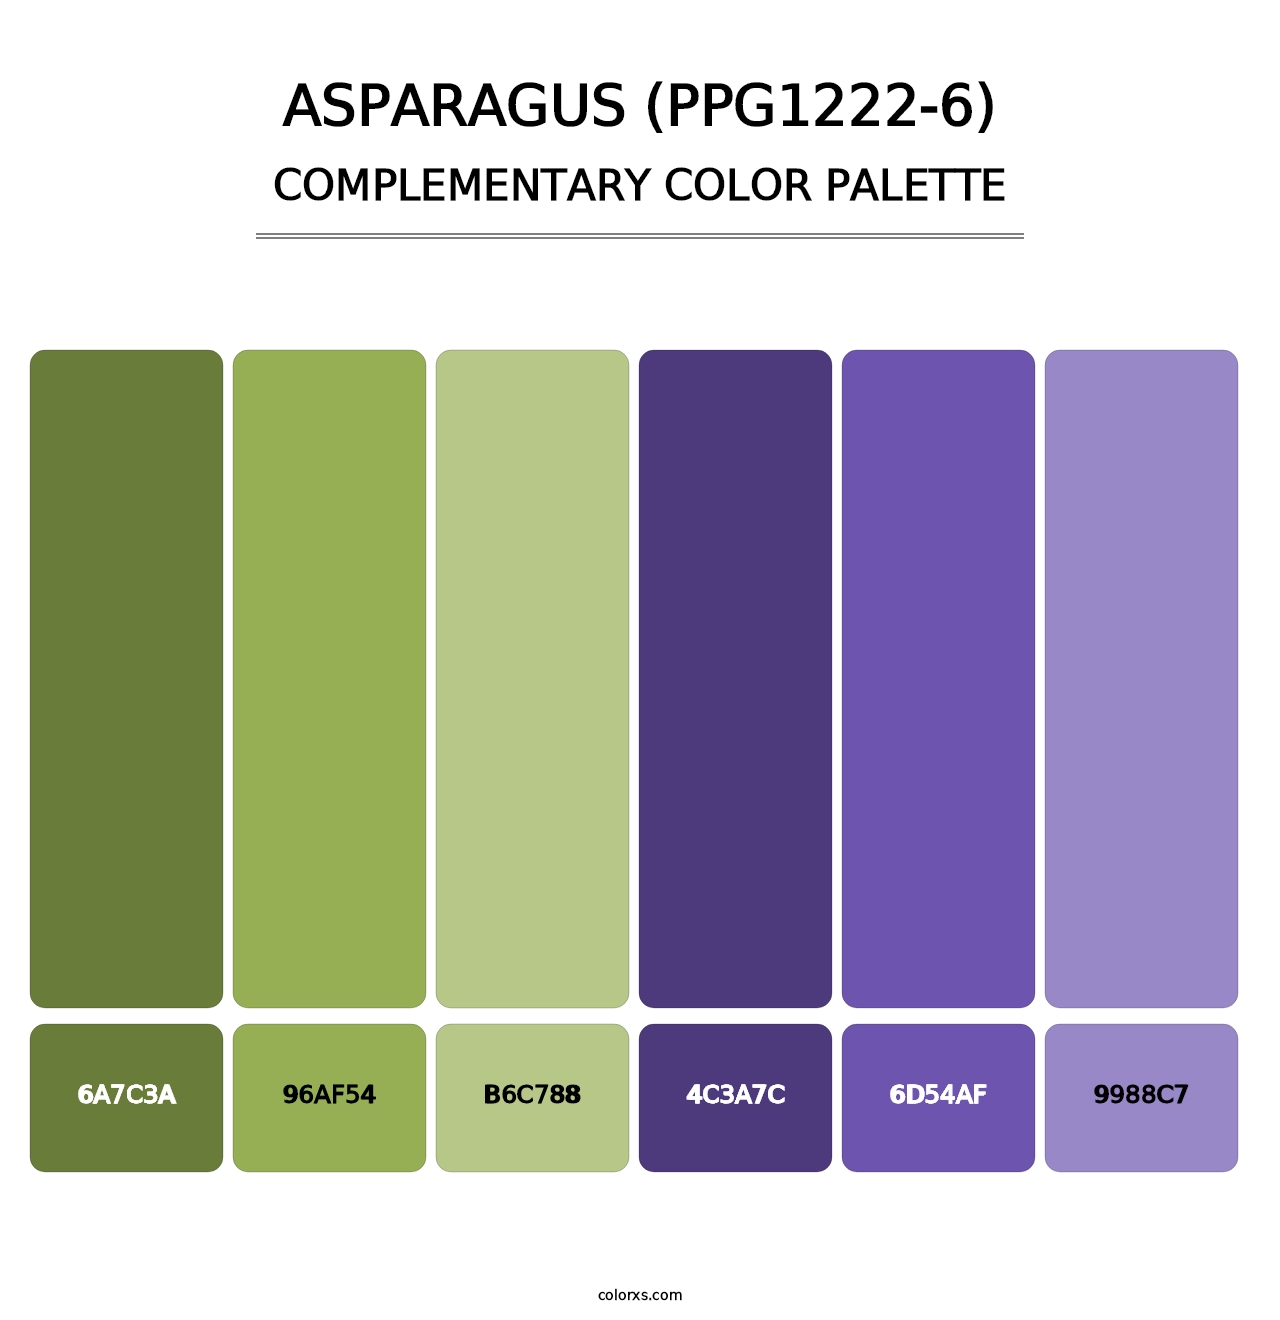 Asparagus (PPG1222-6) - Complementary Color Palette